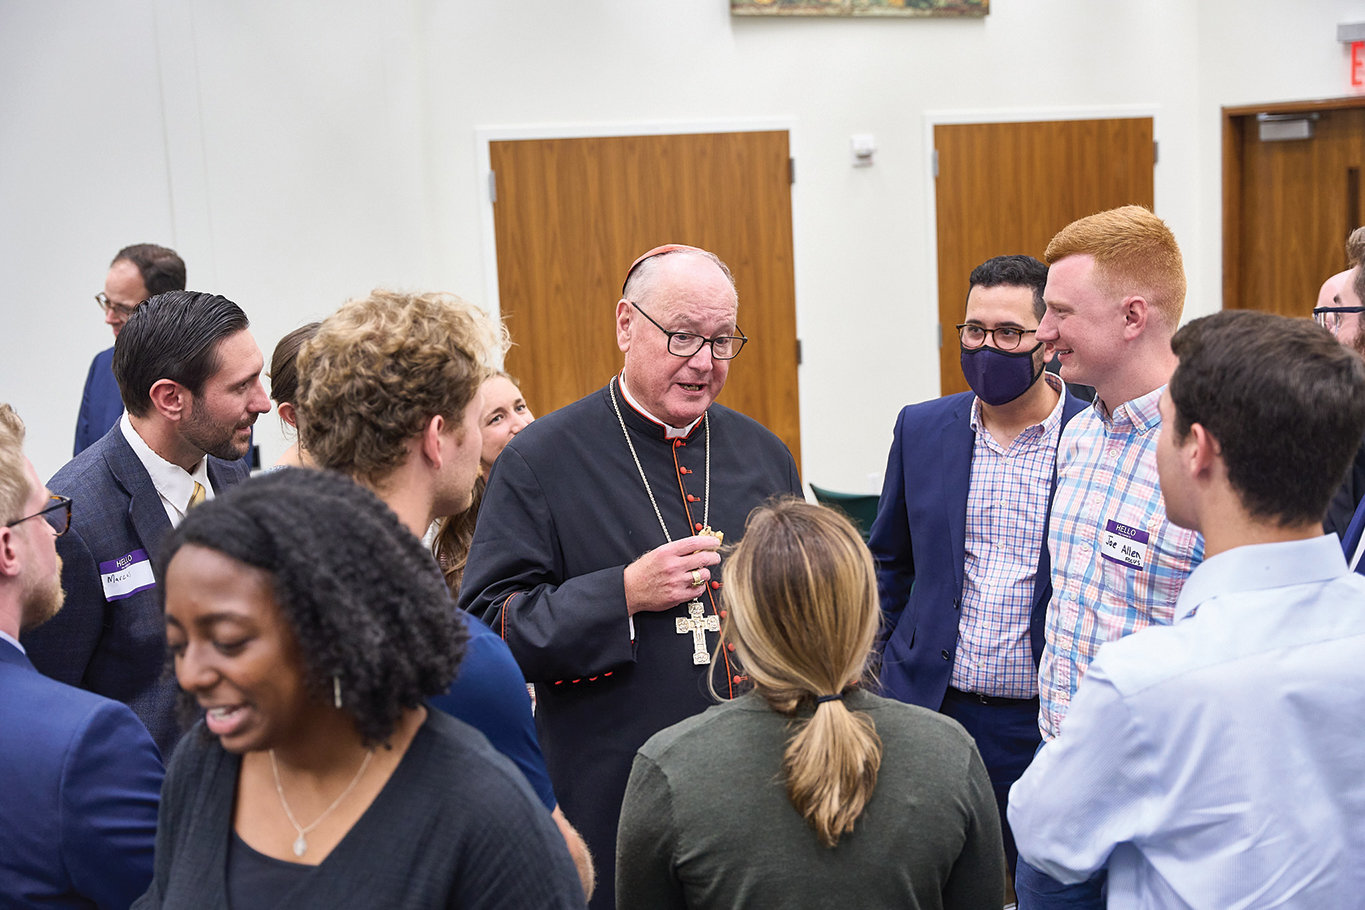 Cardinal Dolan meets students and guests at the Cardinal Egan Catholic Center at New York University in the Greenwich Village section of Manhattan Sept. 8. Cardinal Dolan’s visit came on the 10-year anniversary of the center’s dedication in Cardinal Egan’s name.